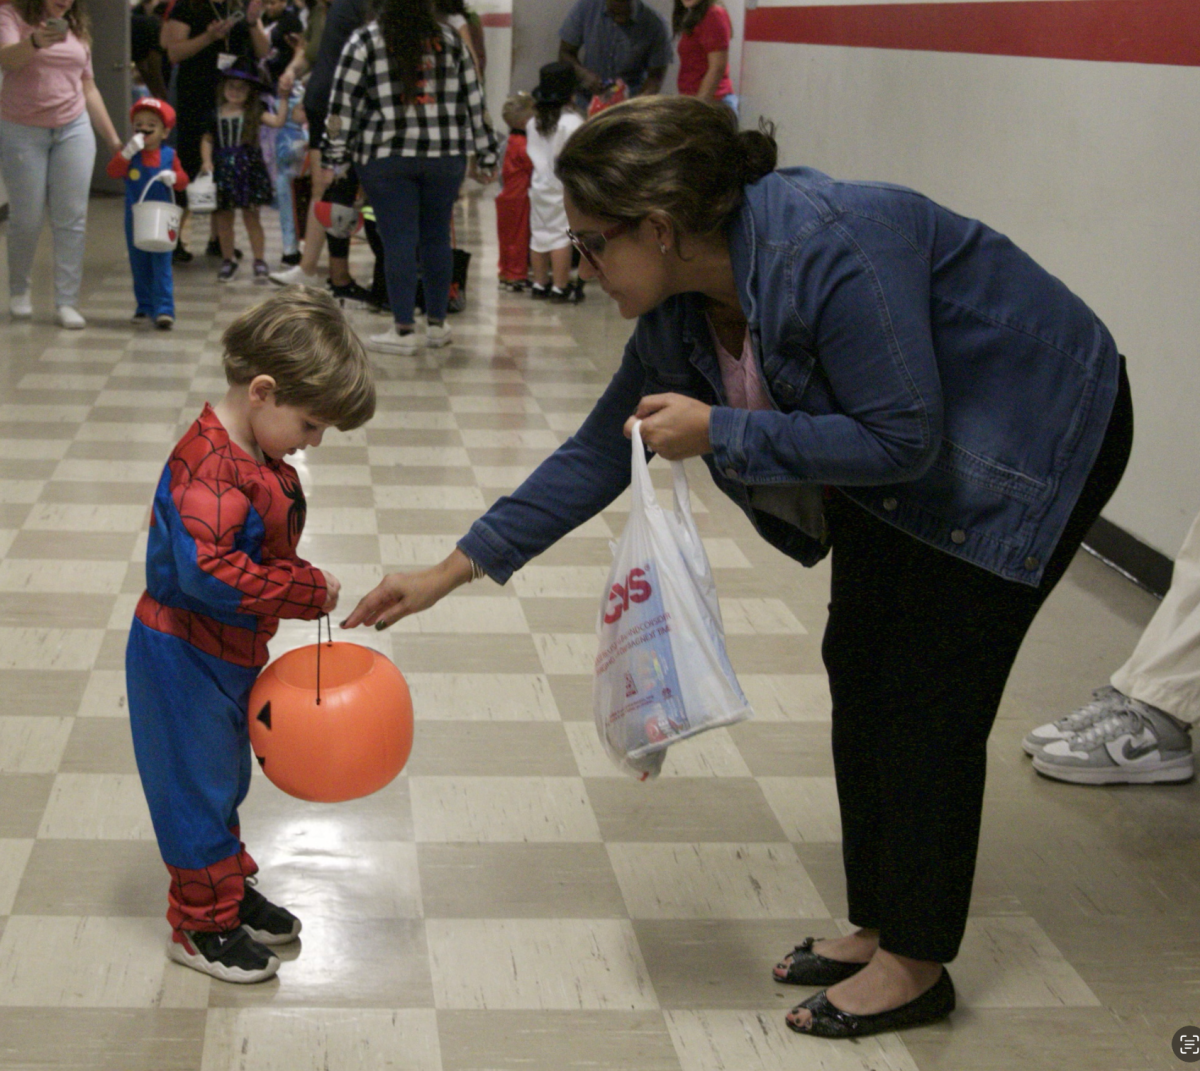 Handing+down+candy+to+a+Little+Cavalier+dressed+up+as+Spider-Man%2C+Ms.+Vazquezbello+volunteered+in+making+the+children+smiles.